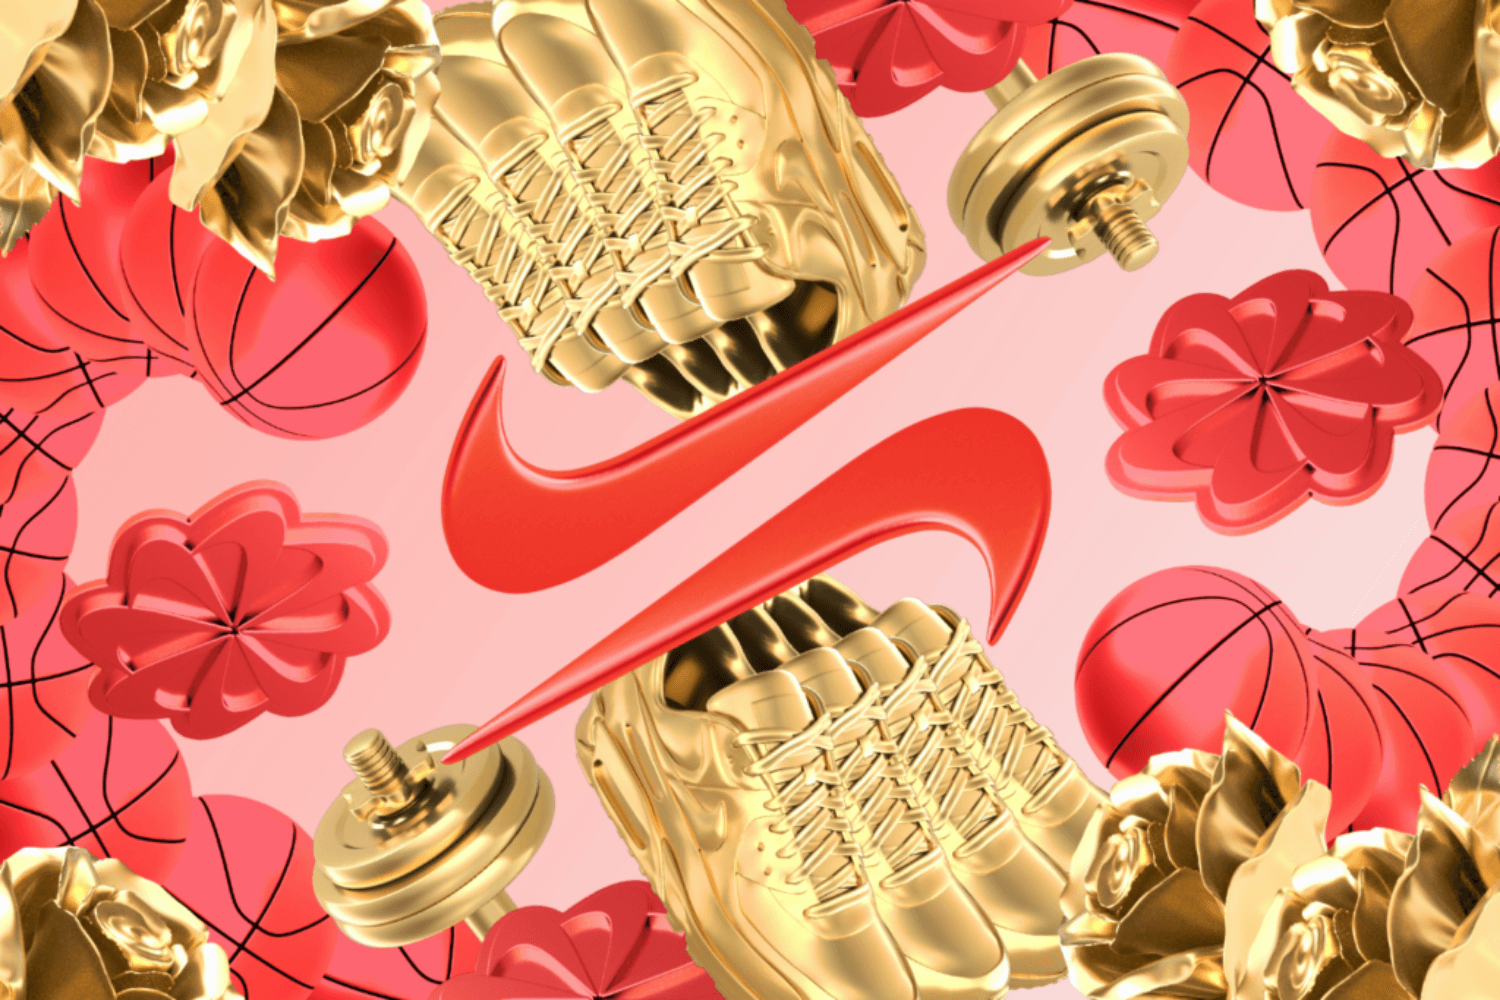 Get 25% off at Nike on two items during Valentine's Day promotion